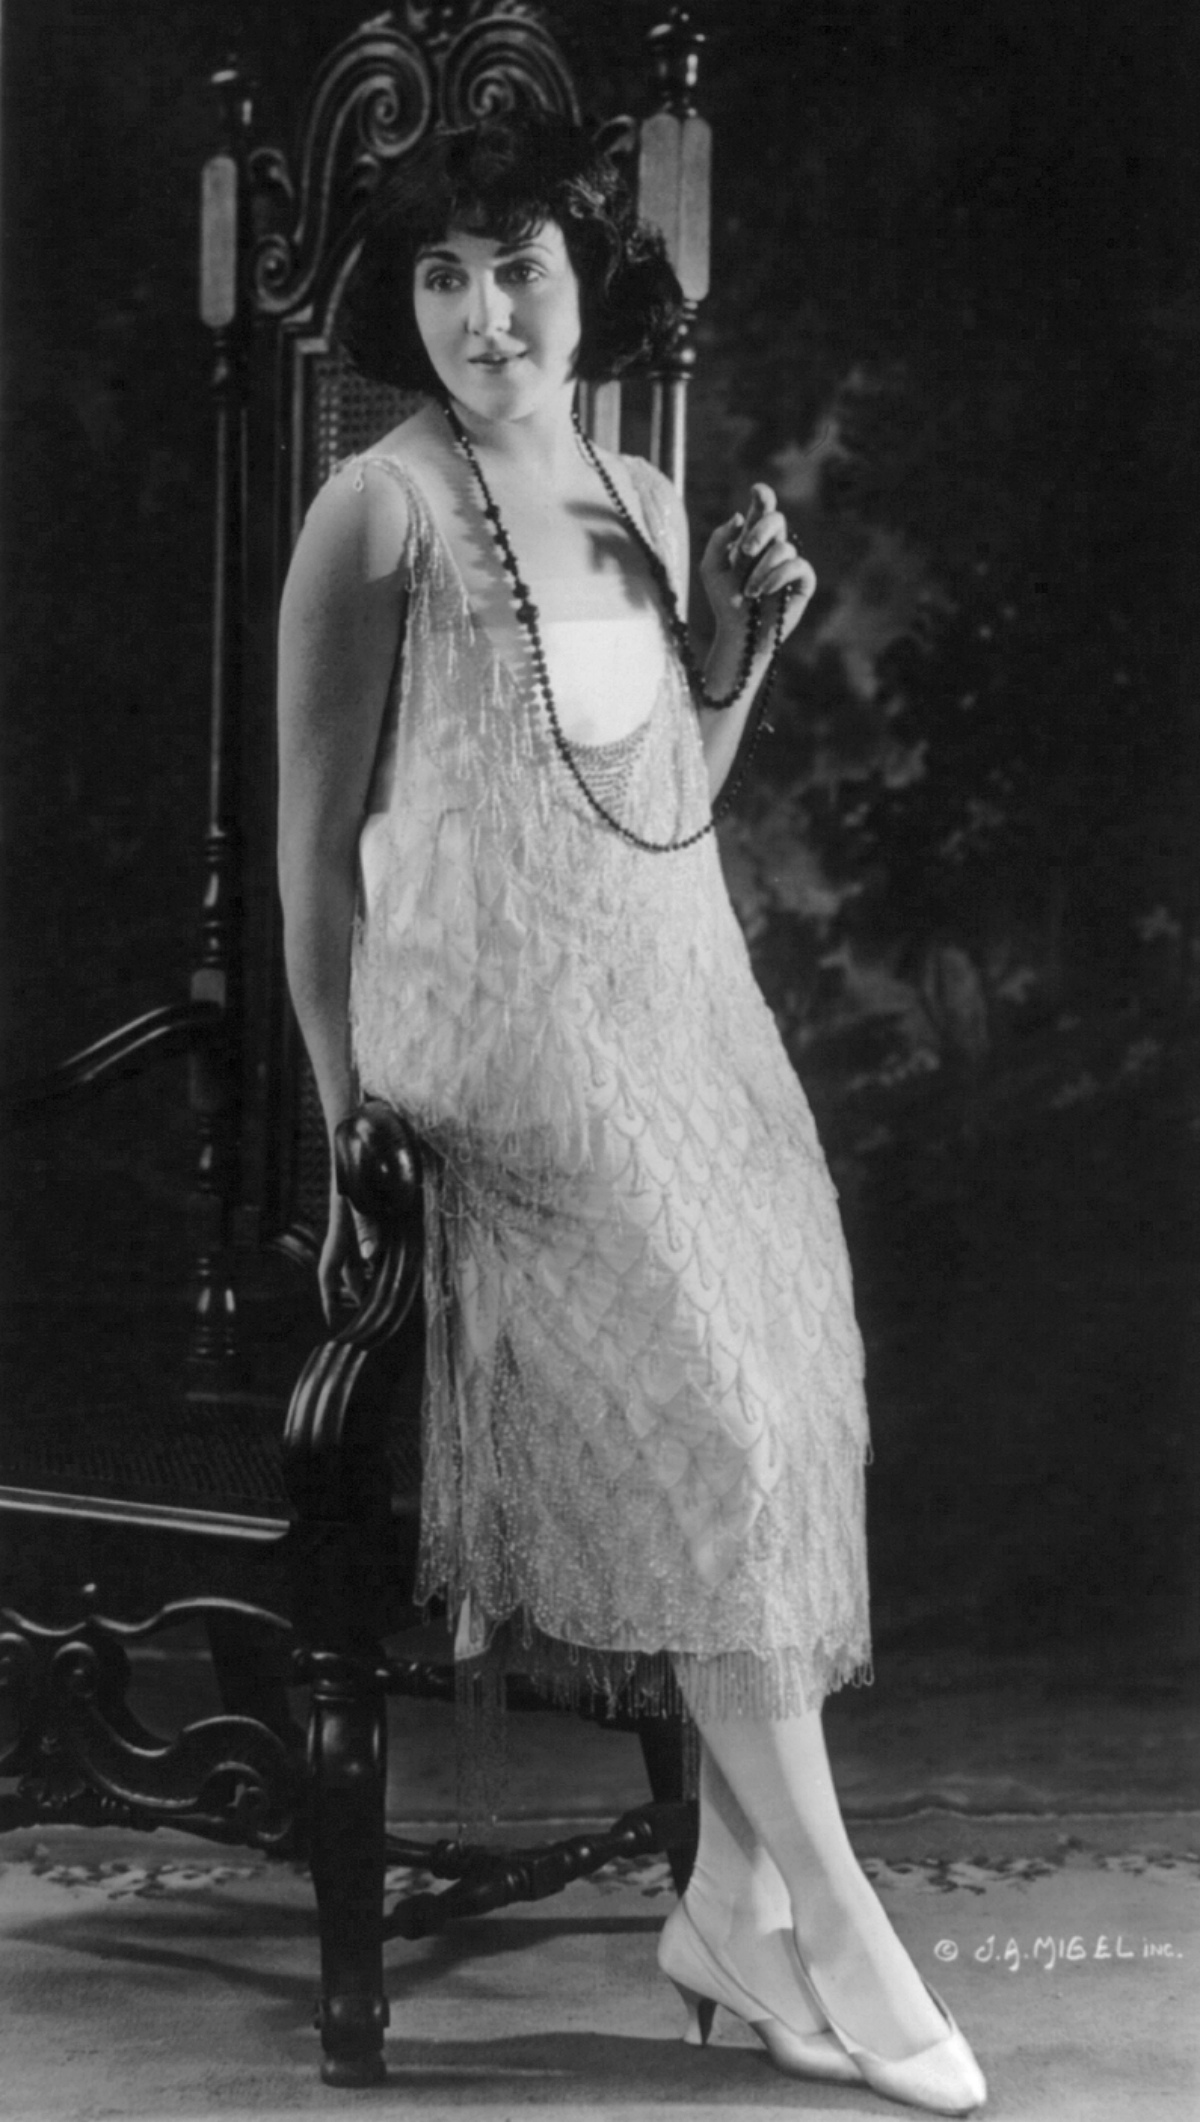 portrait of a 1920s flapper girl